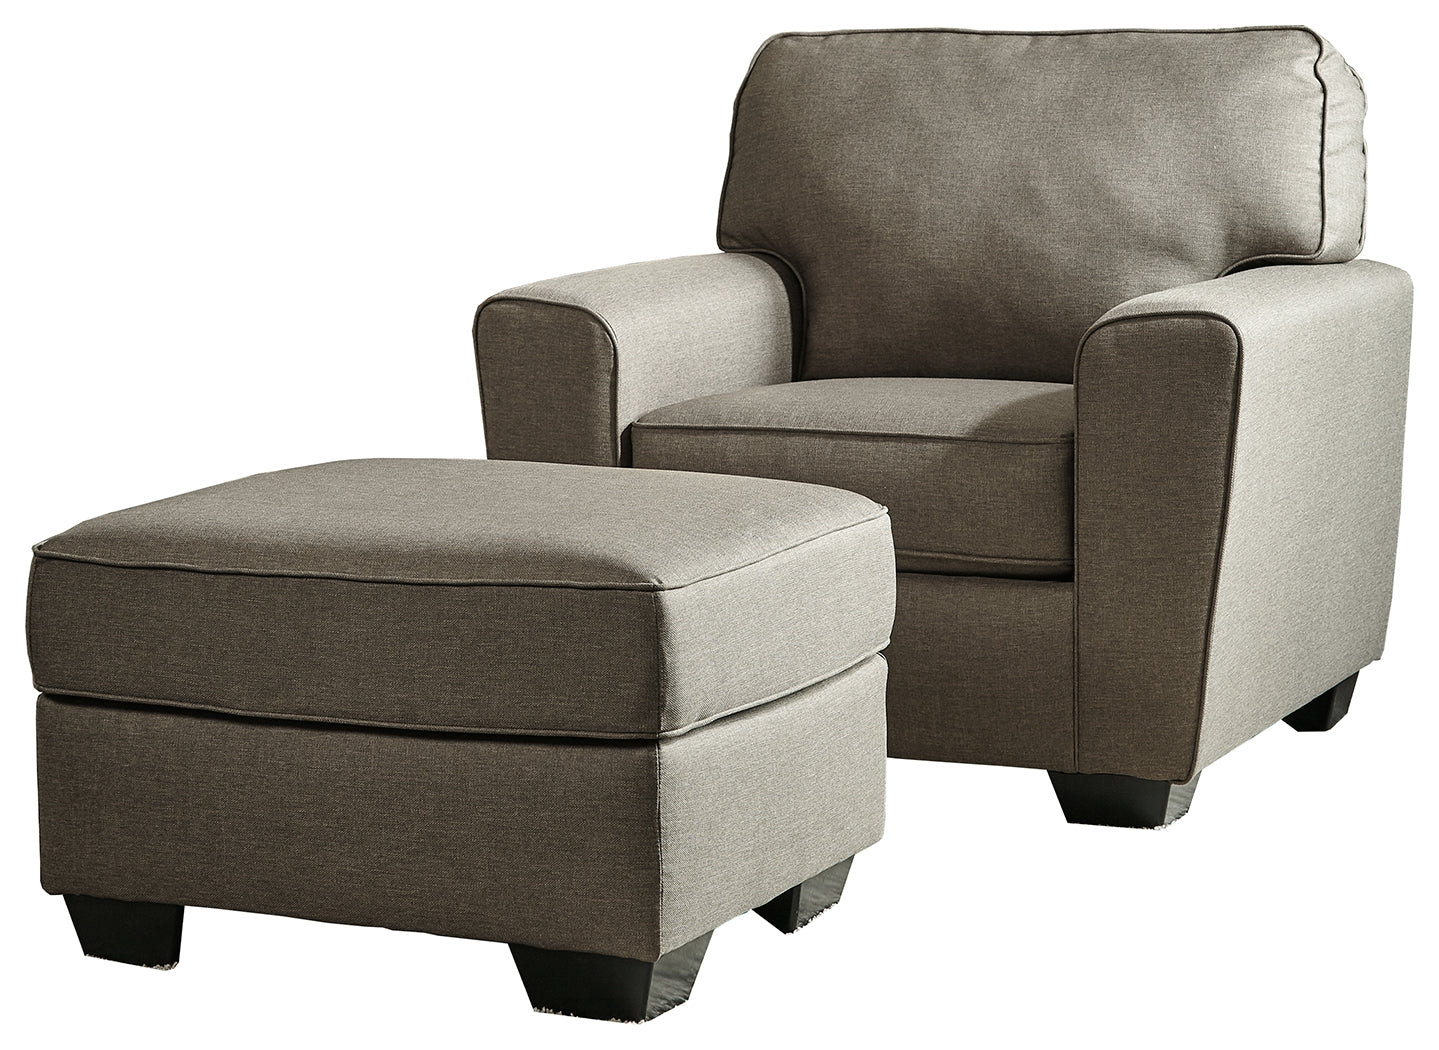 Calicho Benchcraft 2-Piece Chair and Ottoman Set